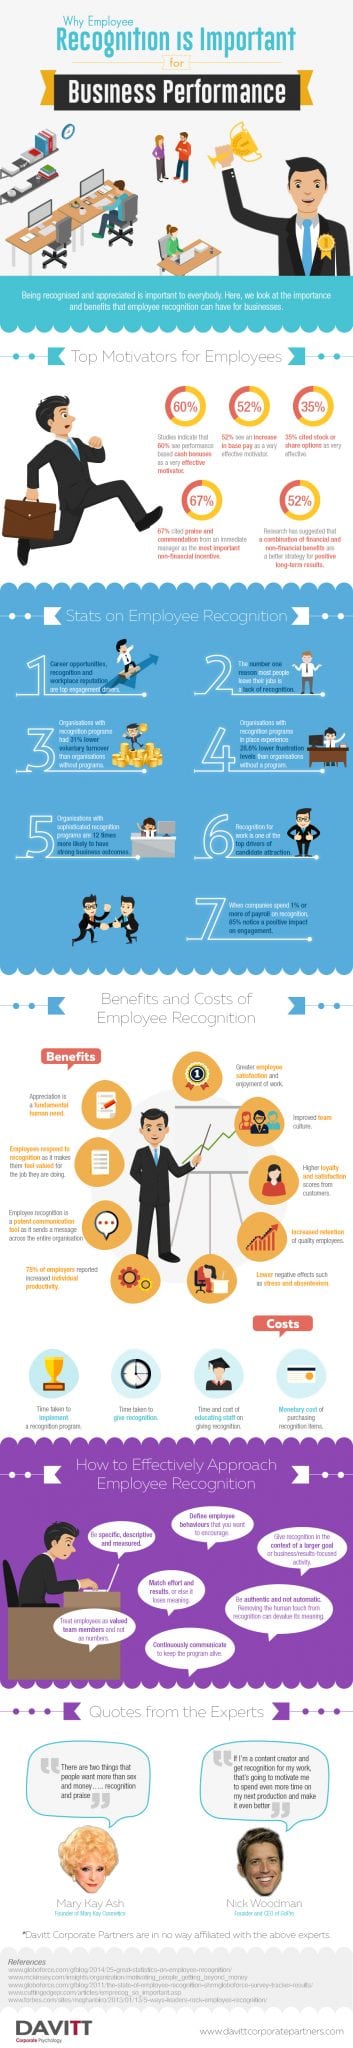 why-employee-recognition-is-important-for-business-performance-infographic